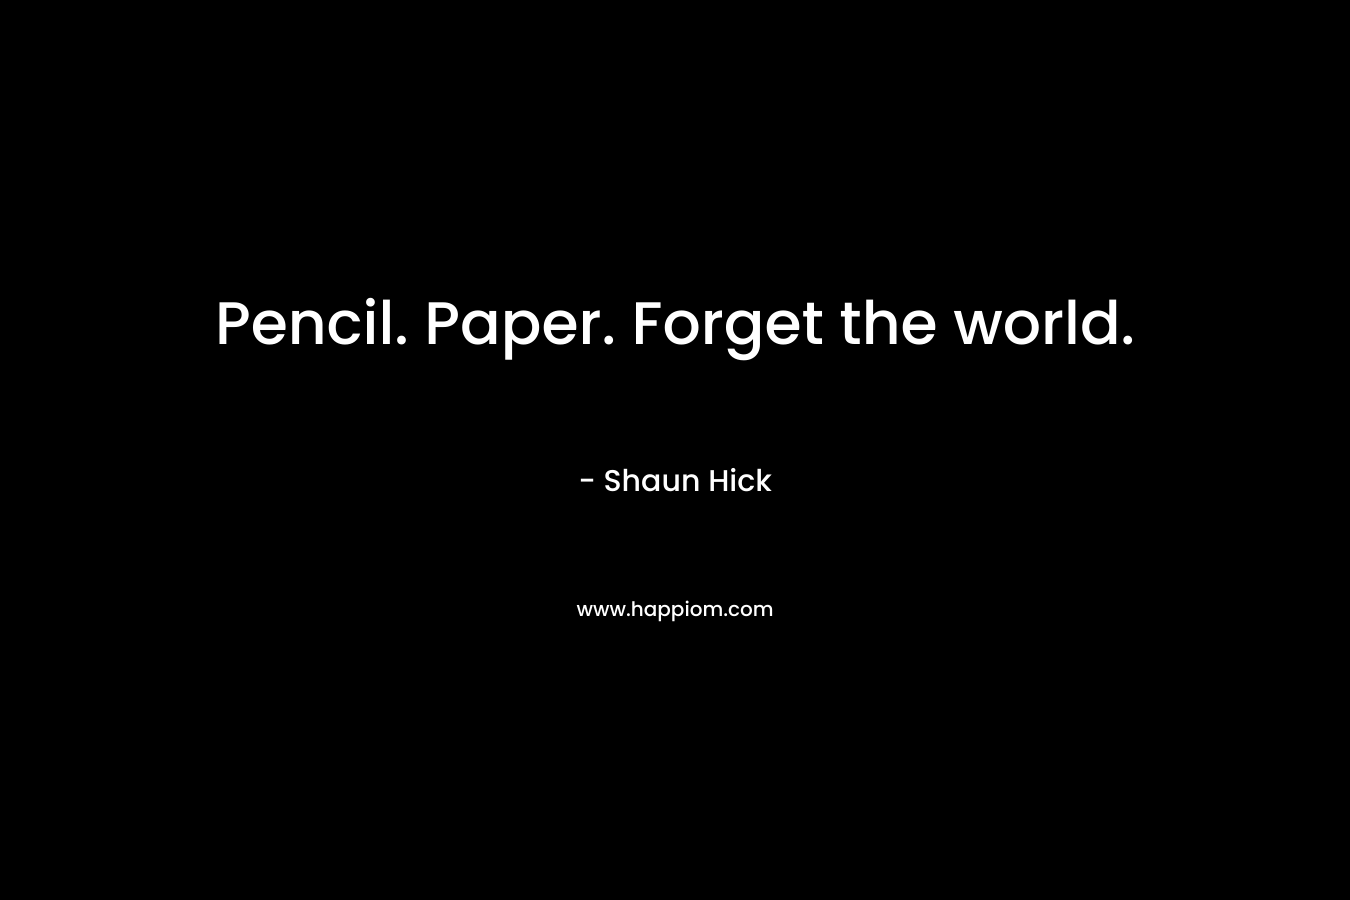 Pencil. Paper. Forget the world.